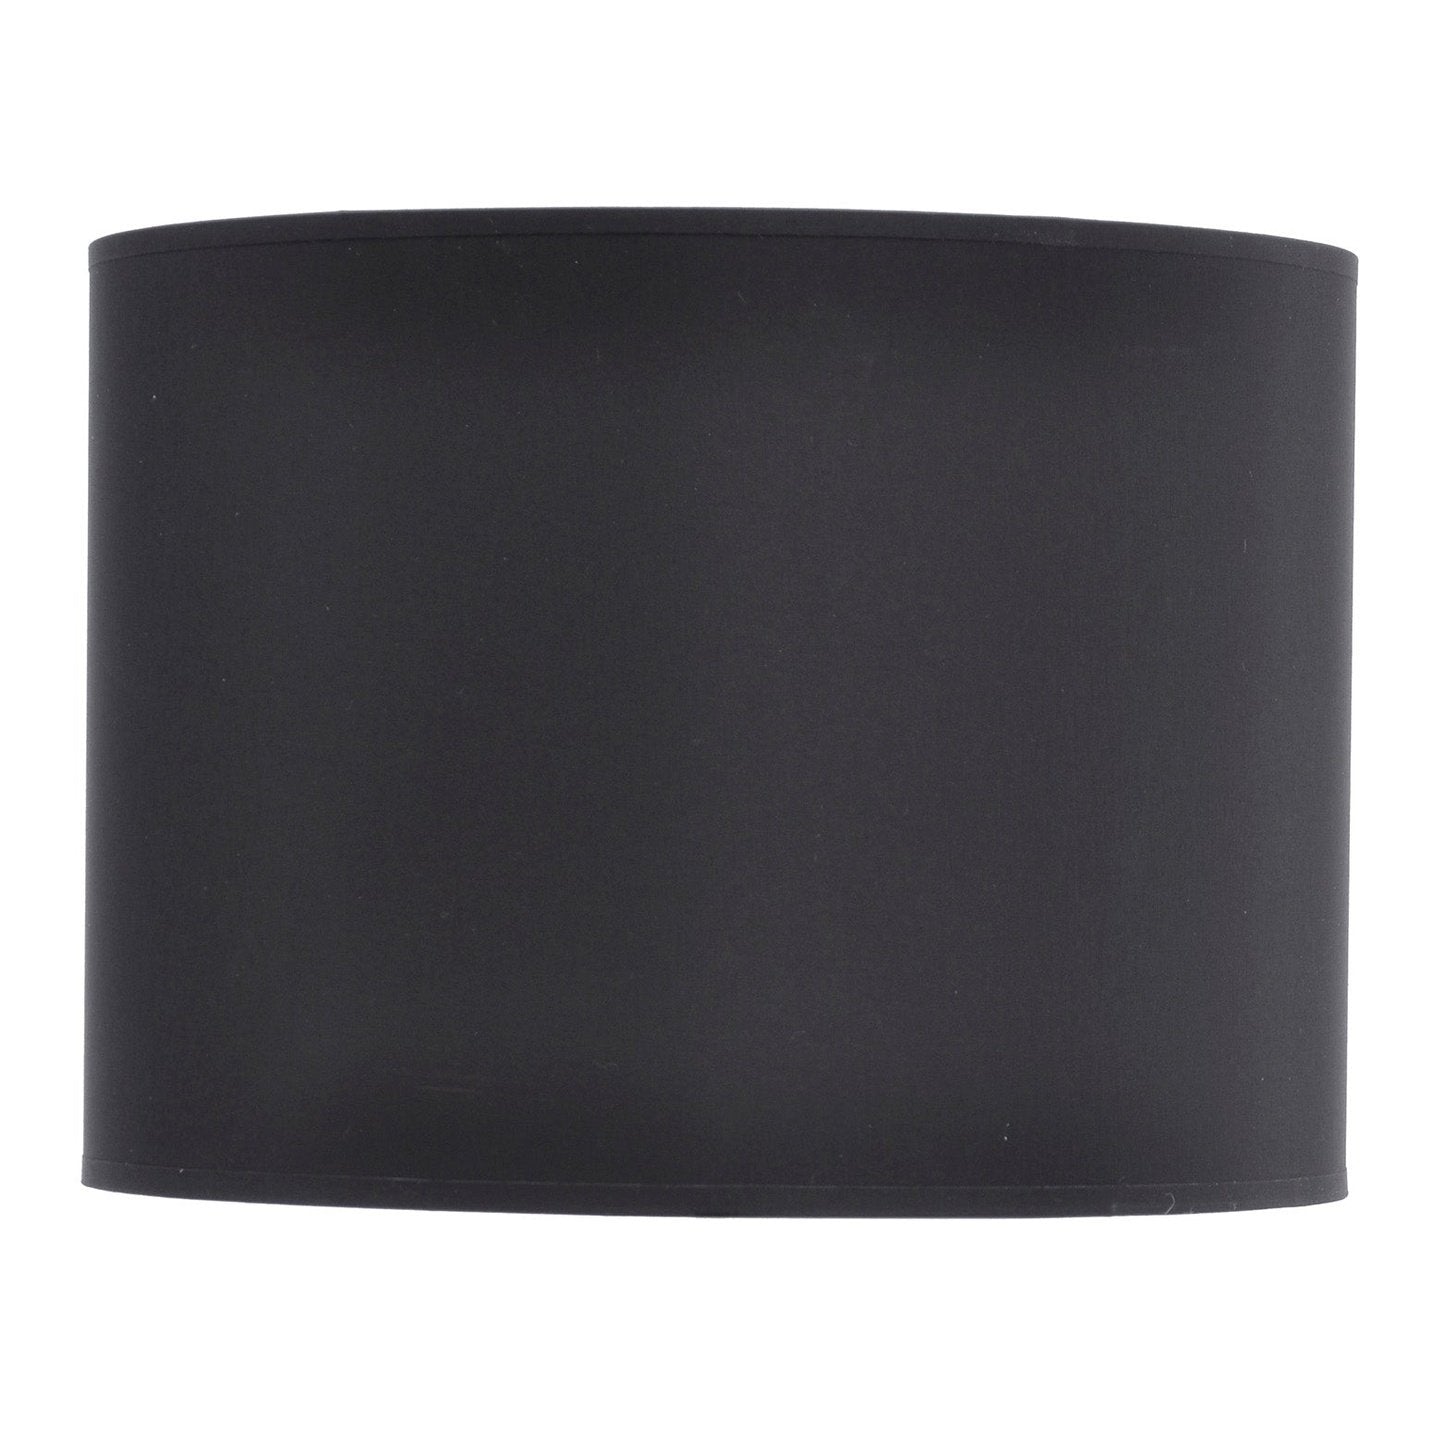 Black and Silver Lined Drum 16" Lampshade